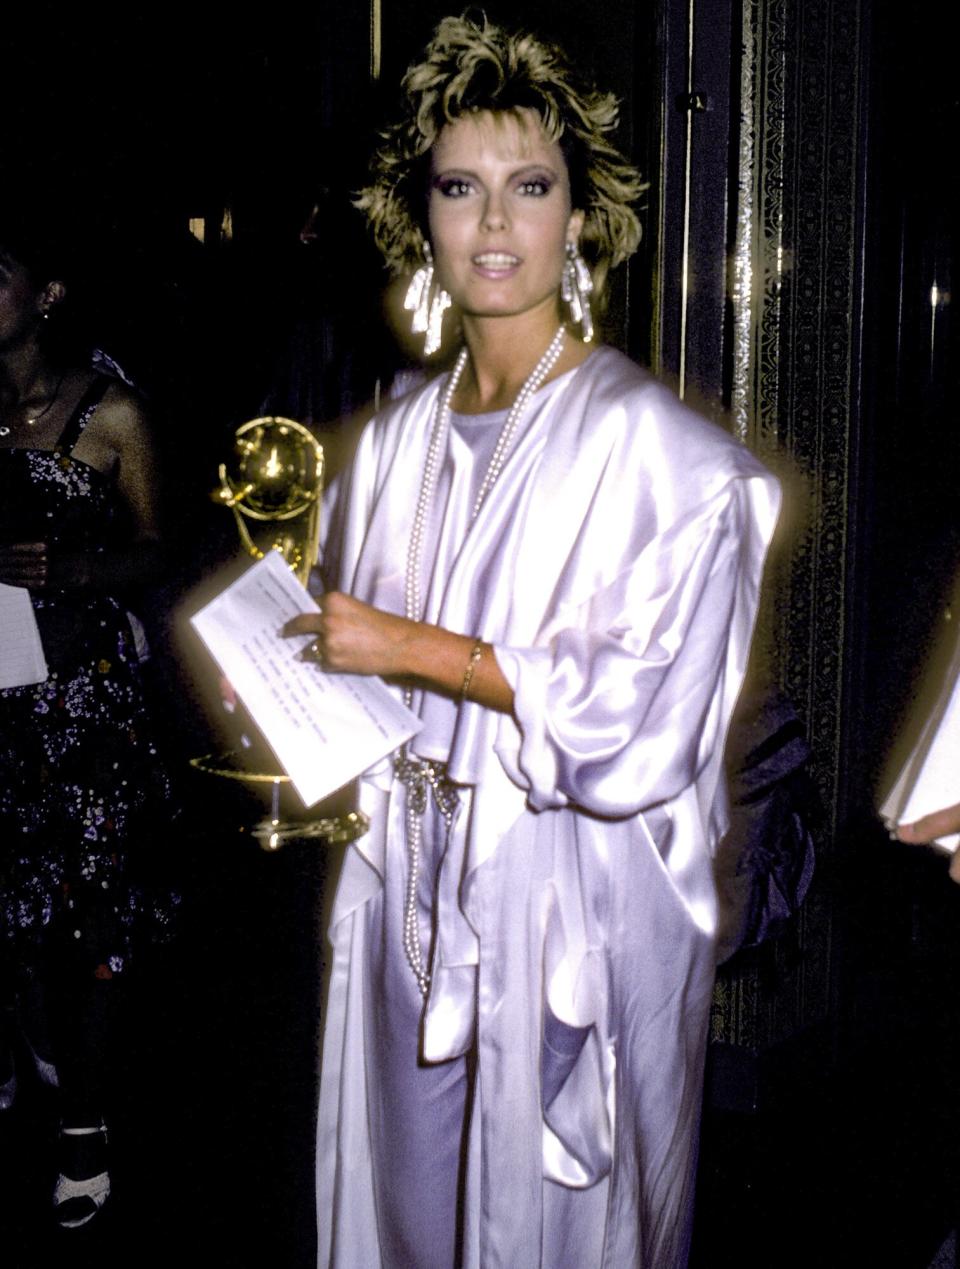 Tracey E. Bregman attends the 12th Annual Daytime Emmy Awards on August 1, 1985 at The Waldorf-Astoria Hotel in New York City.